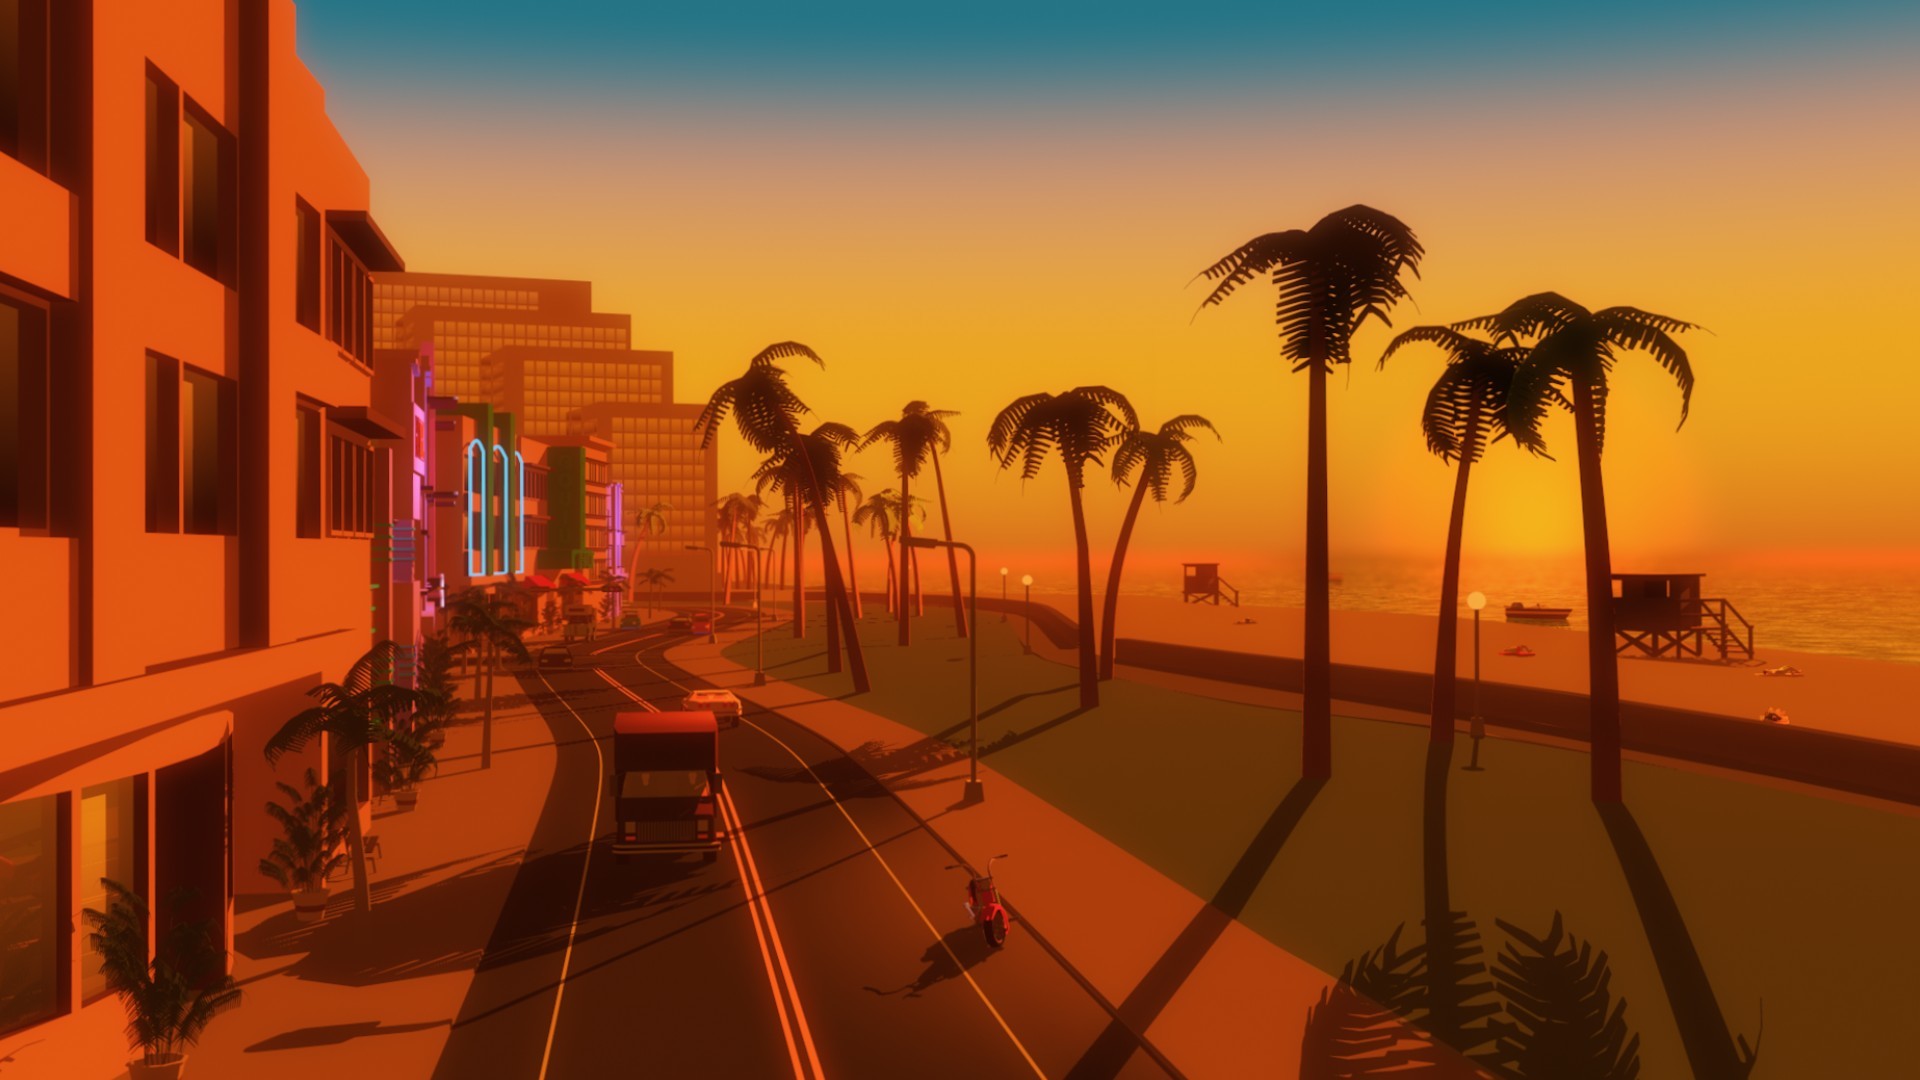 GTA Vice City Wallpapers (67+ pictures)